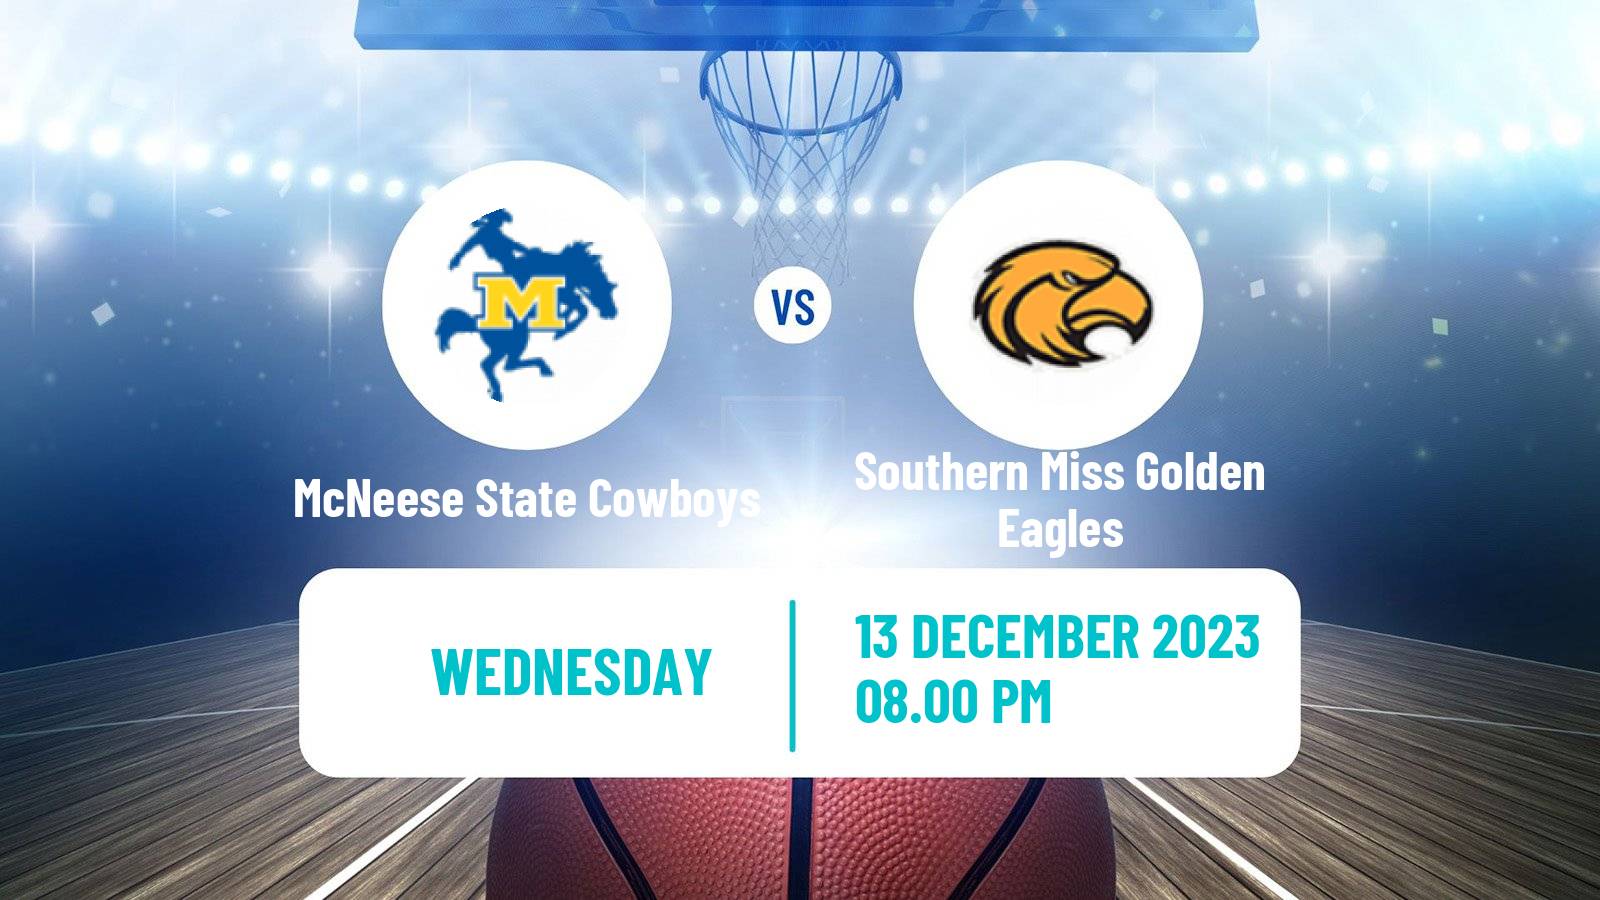 Basketball NCAA College Basketball McNeese State Cowboys - Southern Miss Golden Eagles